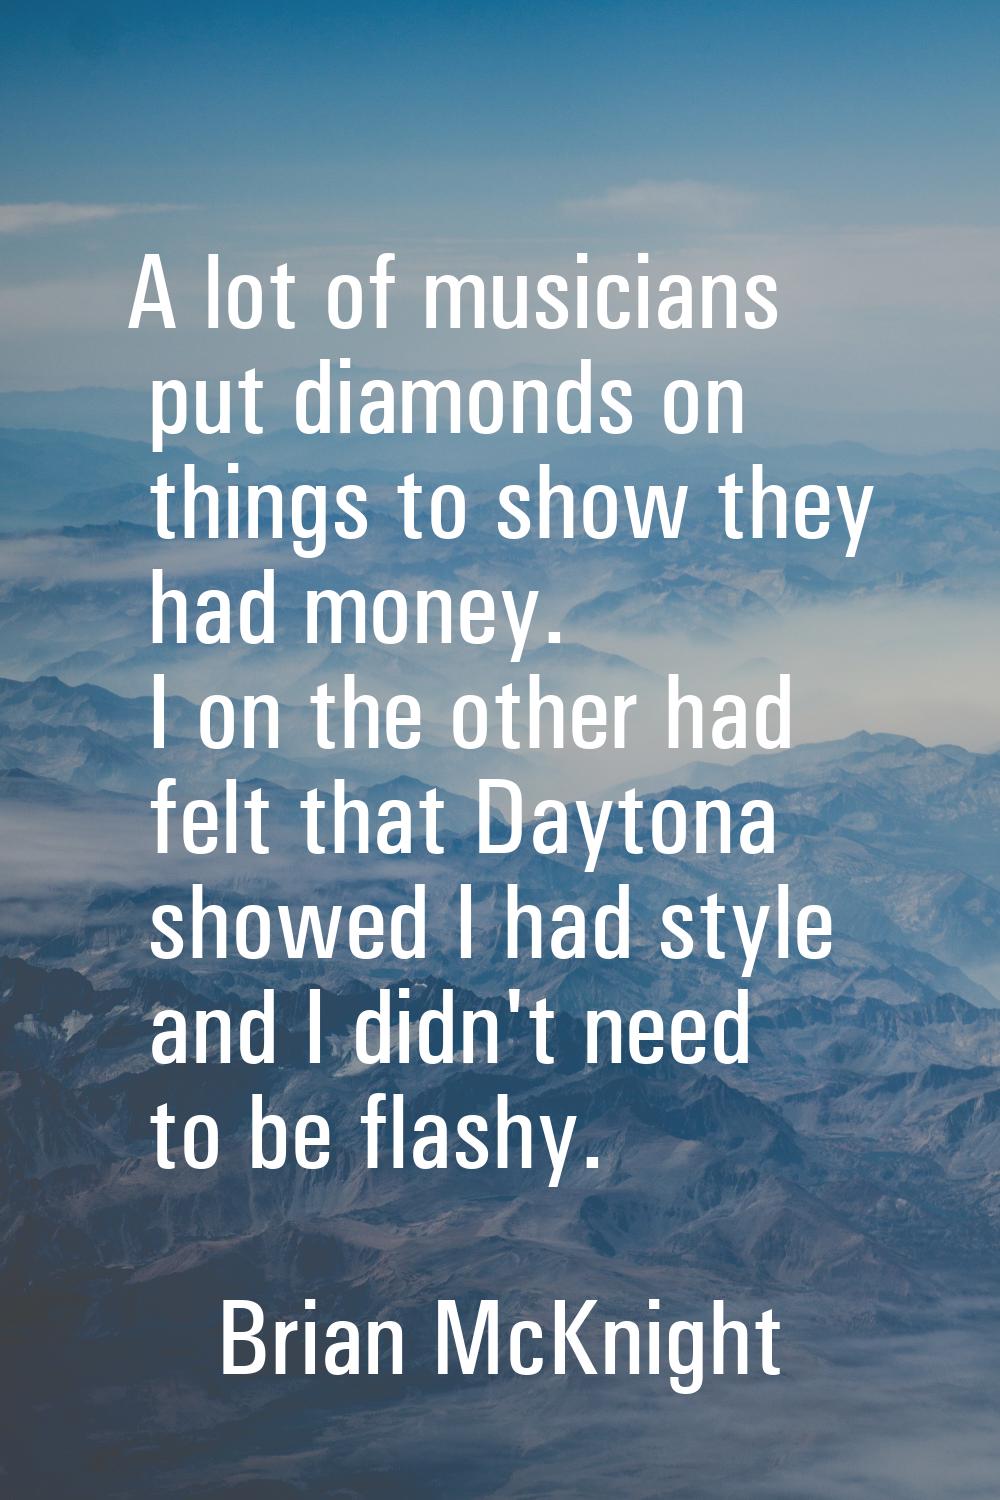 A lot of musicians put diamonds on things to show they had money. I on the other had felt that Dayt